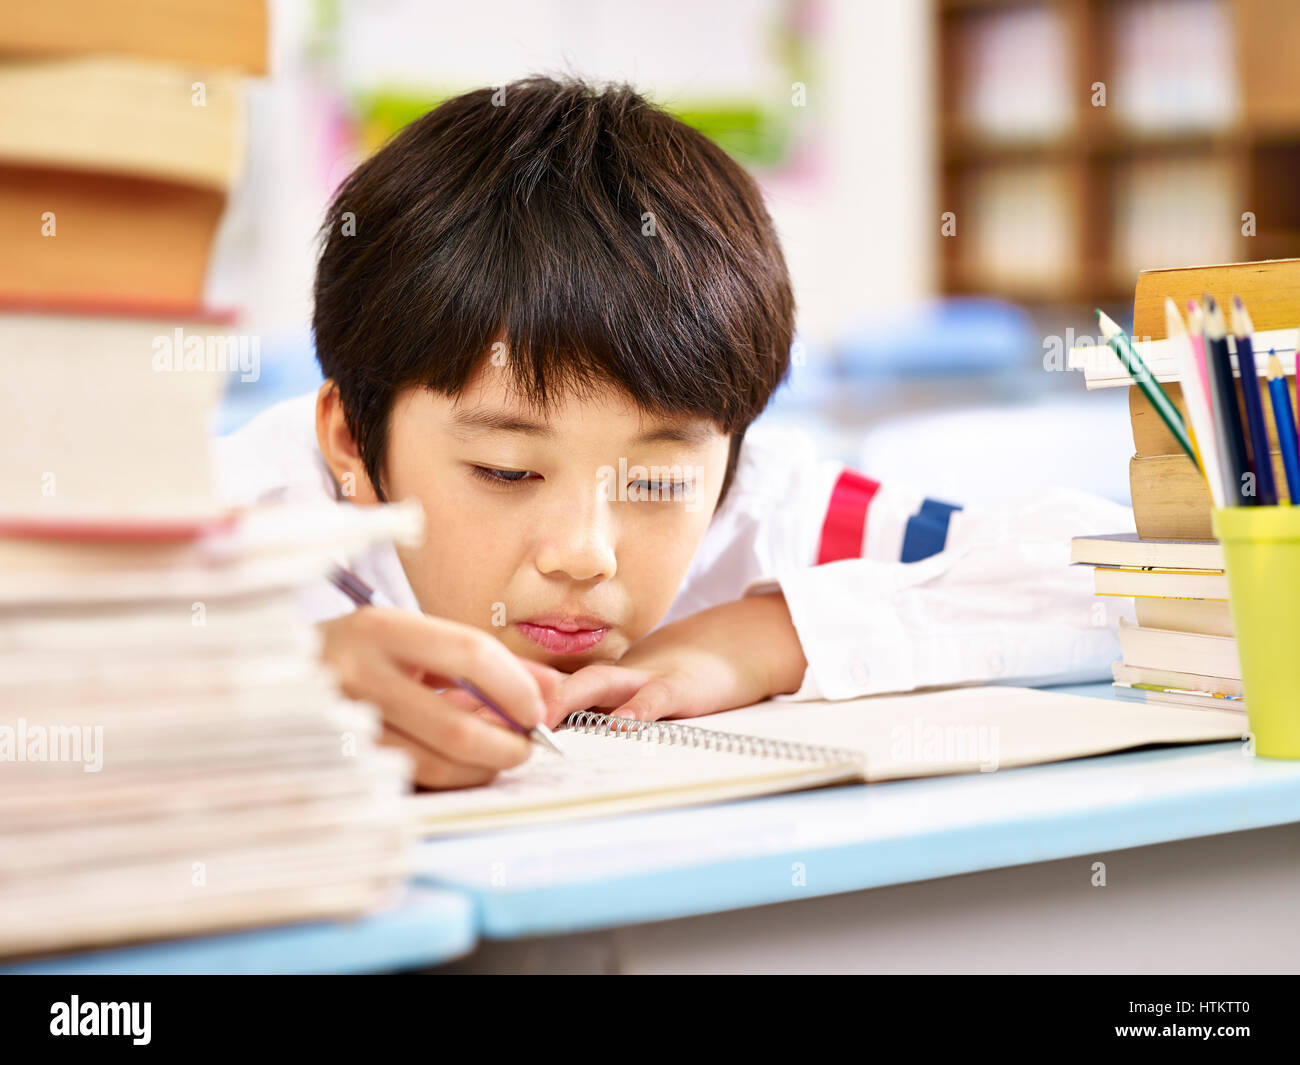 tired and bored asian elementary school boy doing homework in classroom, head resting on desk. Stock Photo